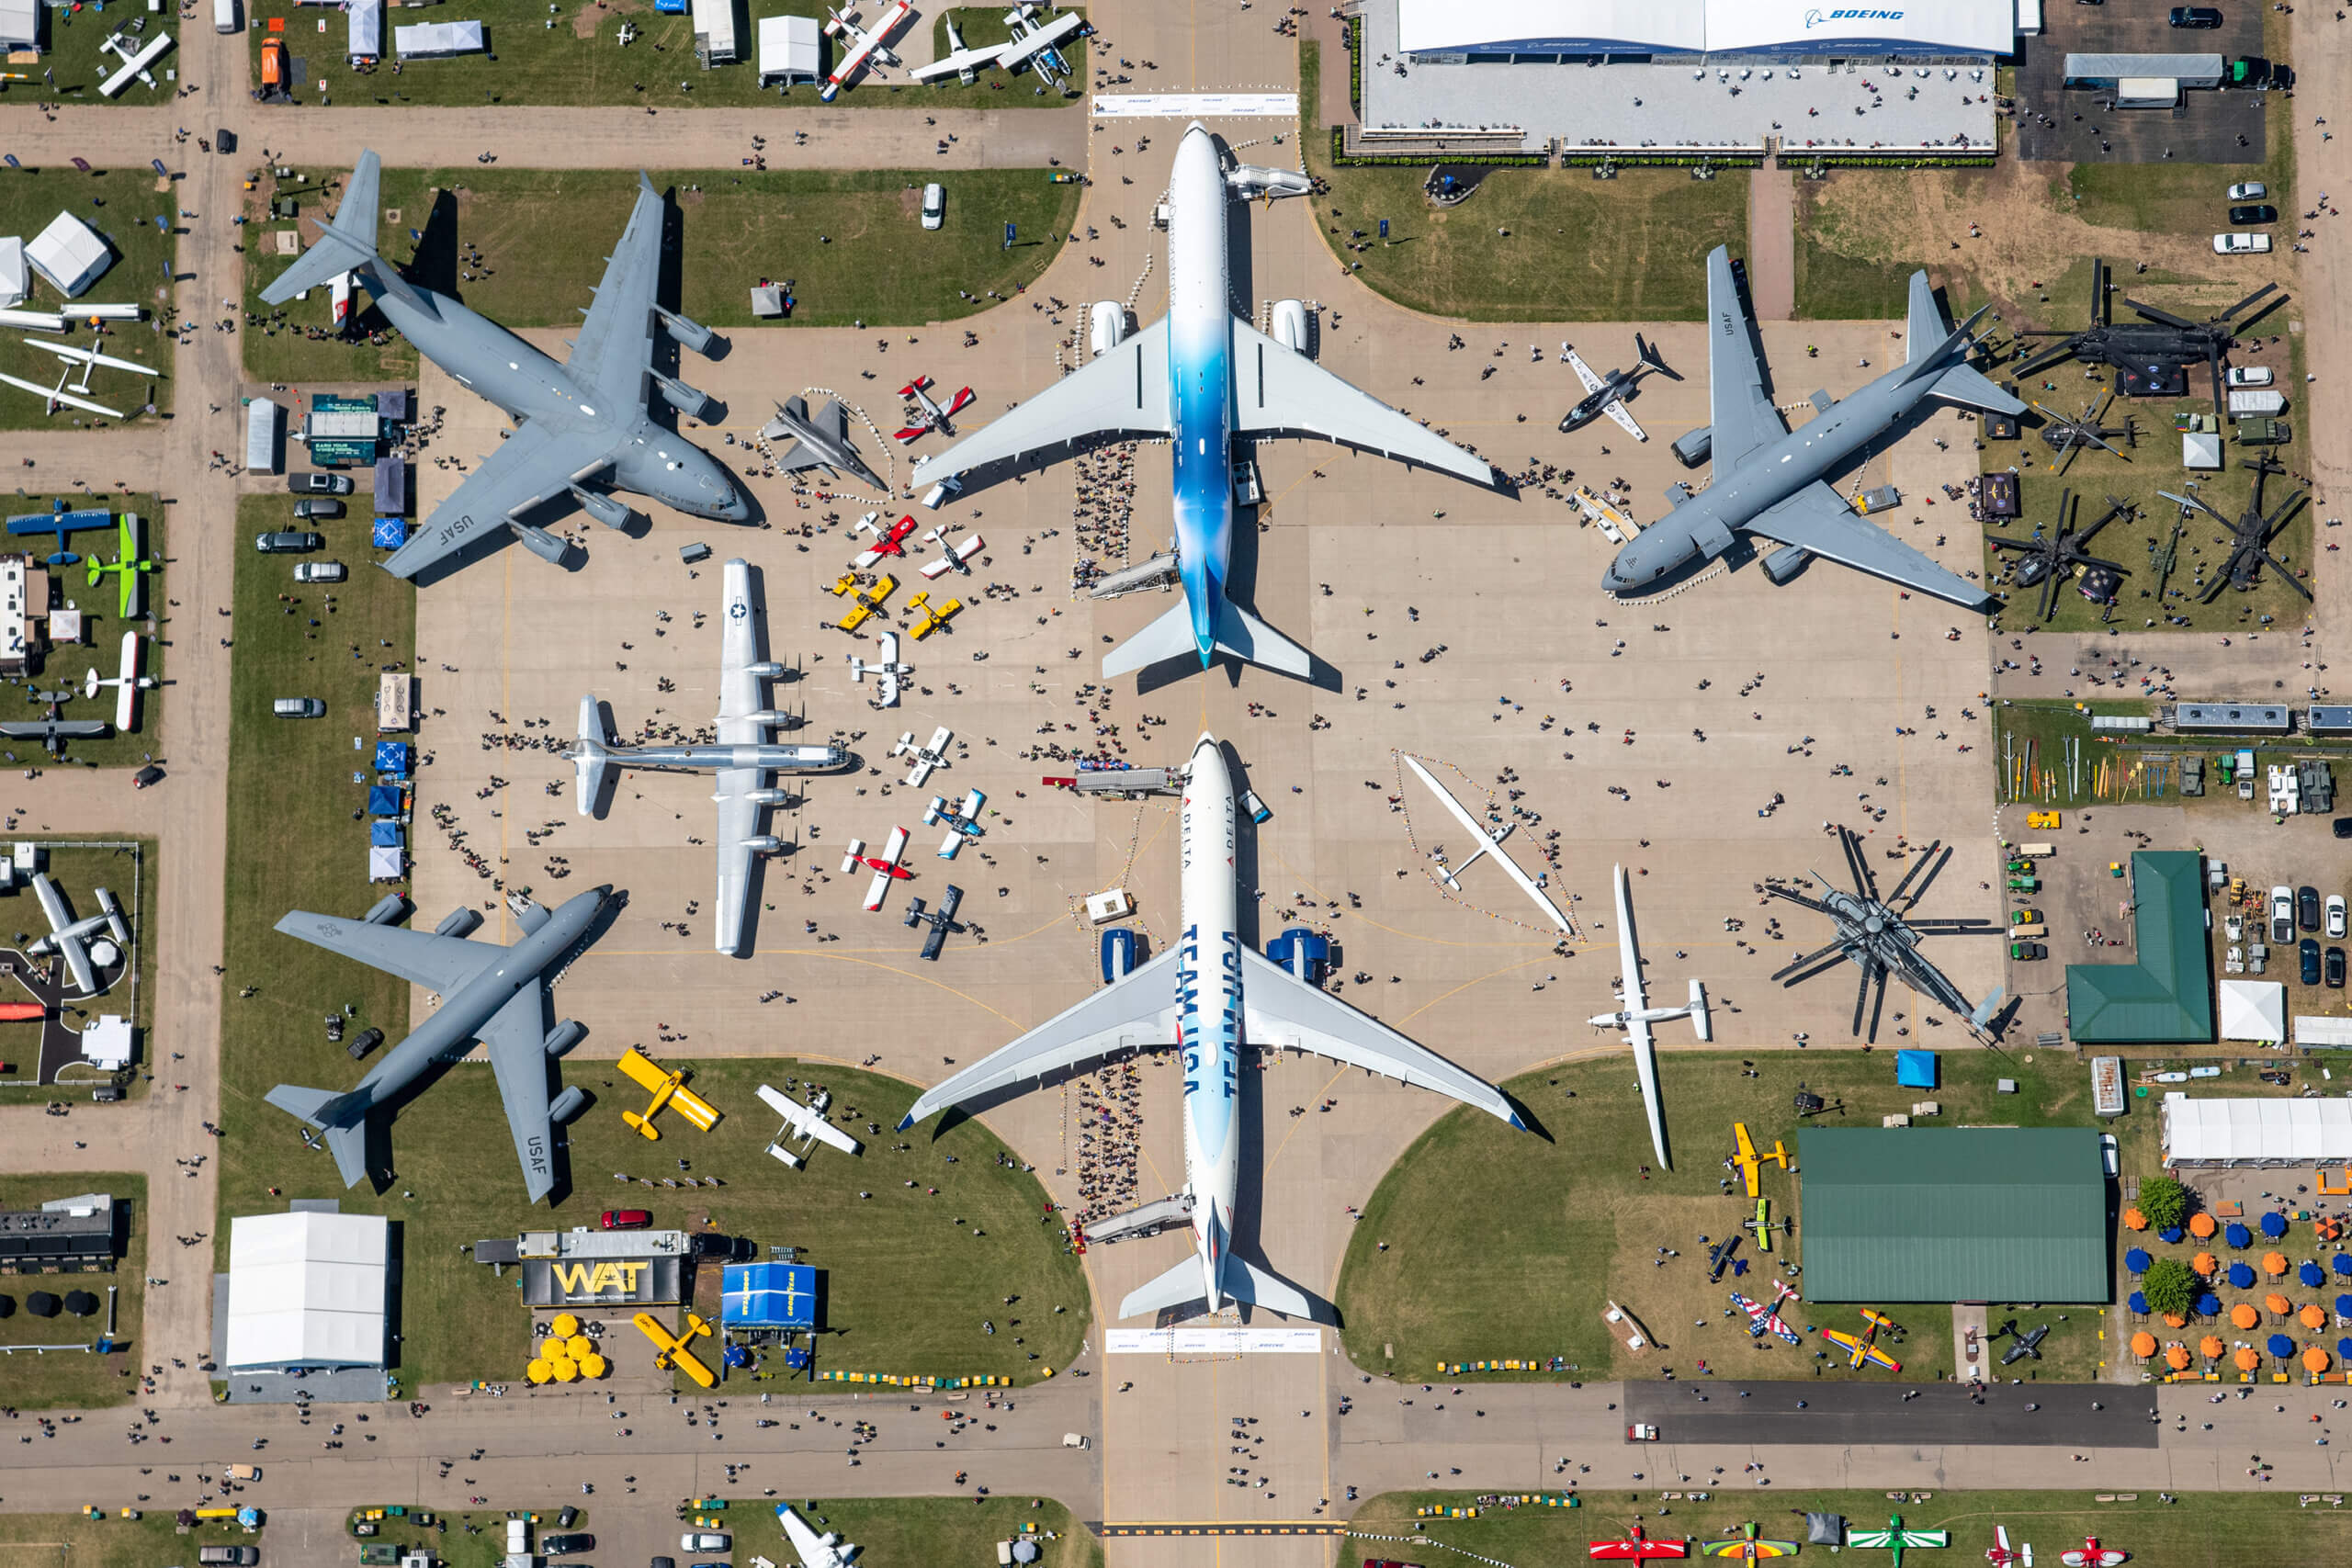 An aerial view of dozens of planes on display at Oshkosh